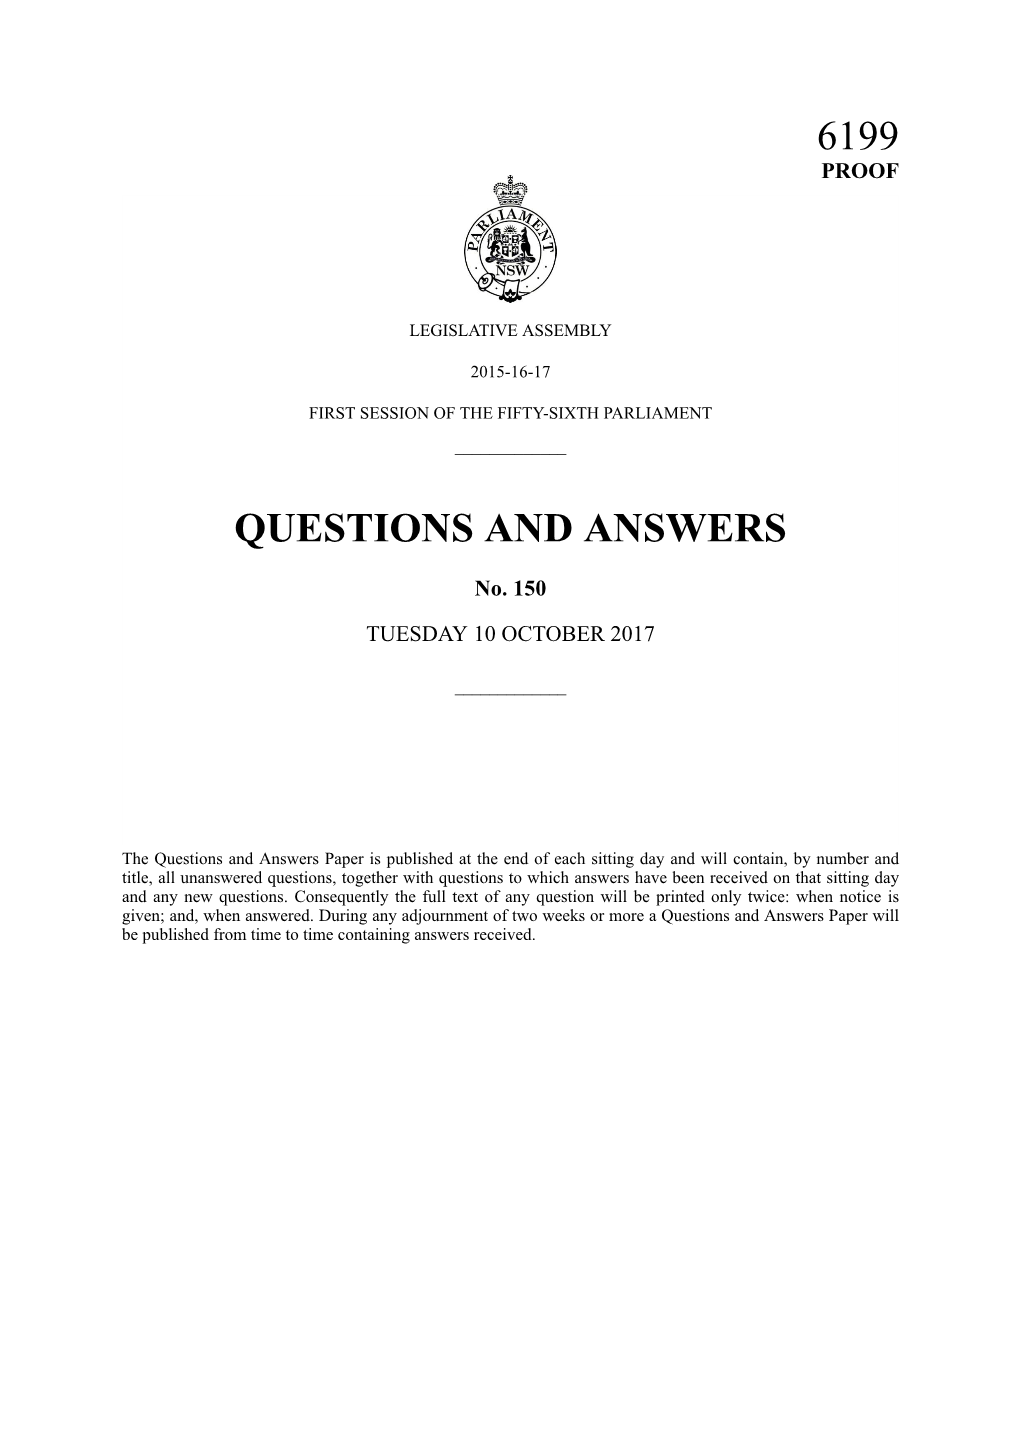 Questions and Answers 6199